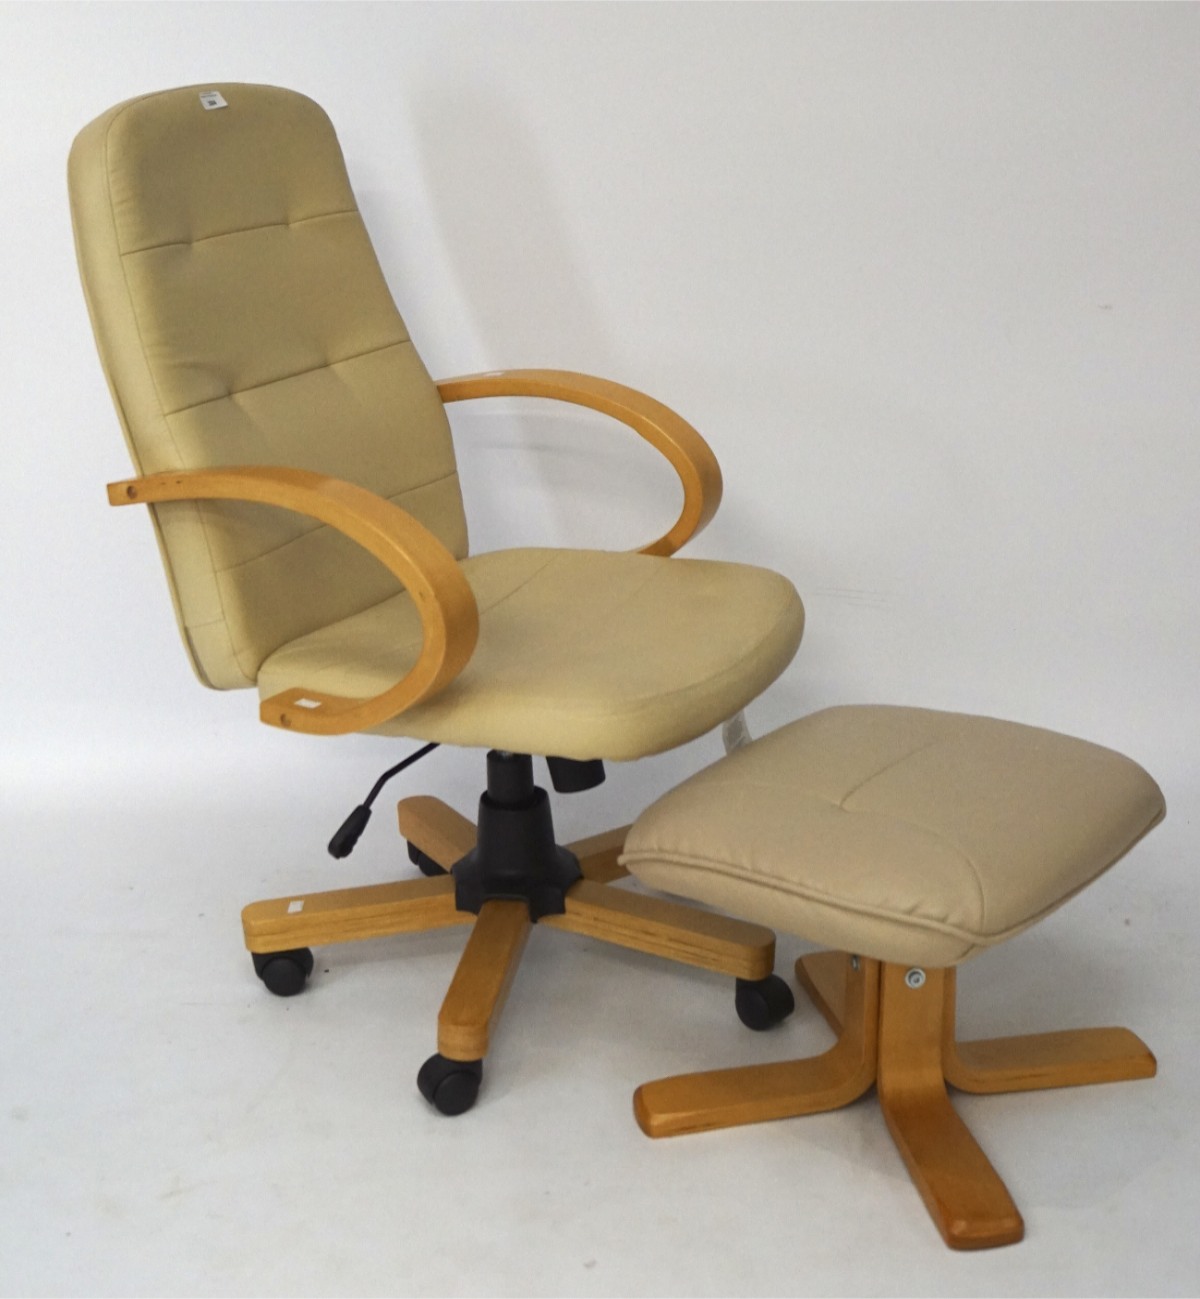 A Retro swivel chair and footstool, upholstered in cream leather with wooden armrests and base,